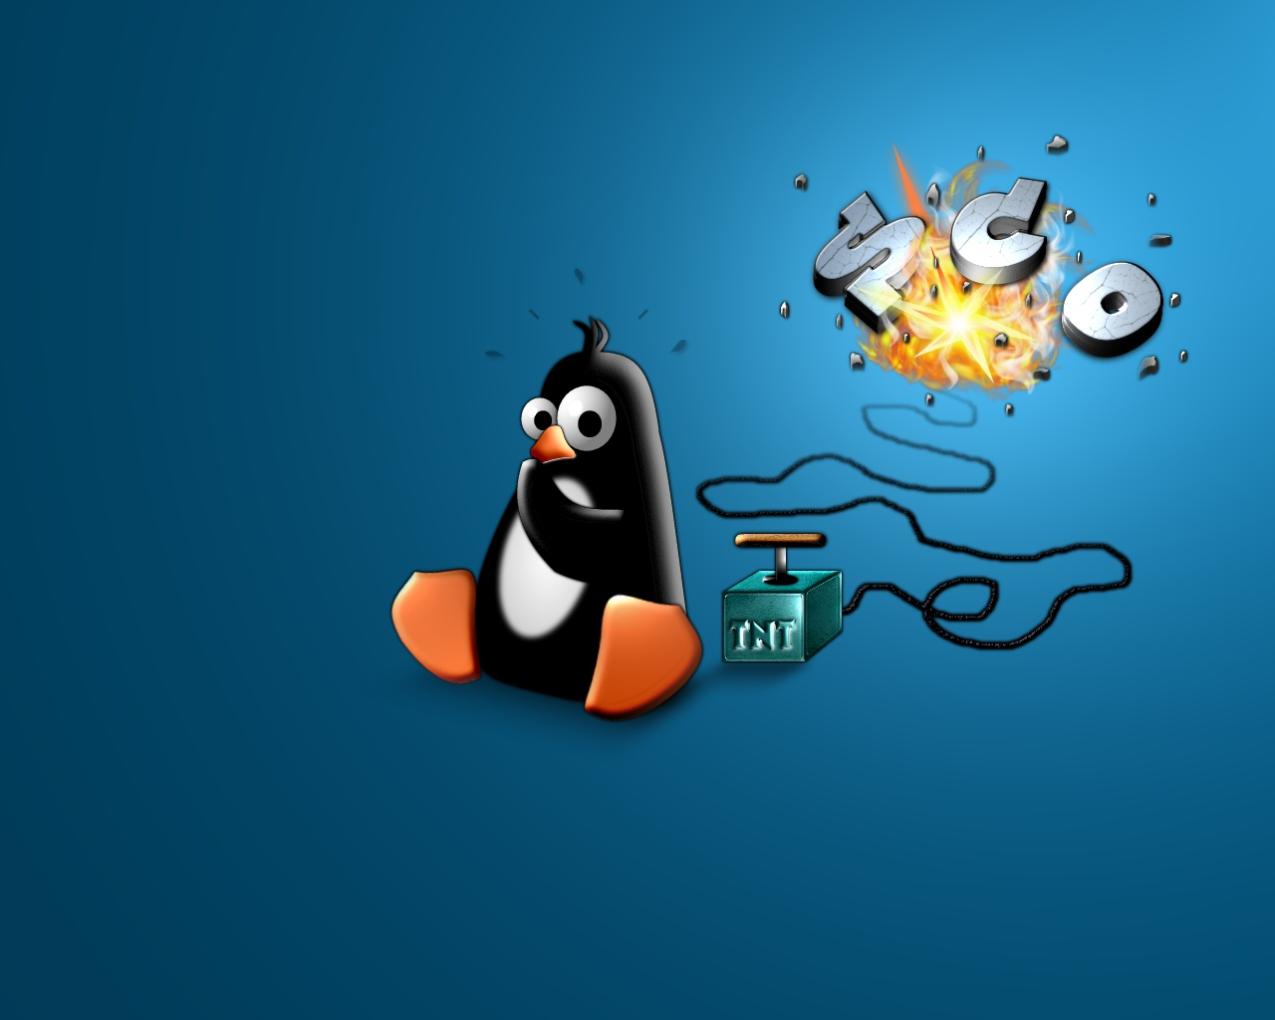 What Are The Most Important Linux Command Line Commands For System Administration?